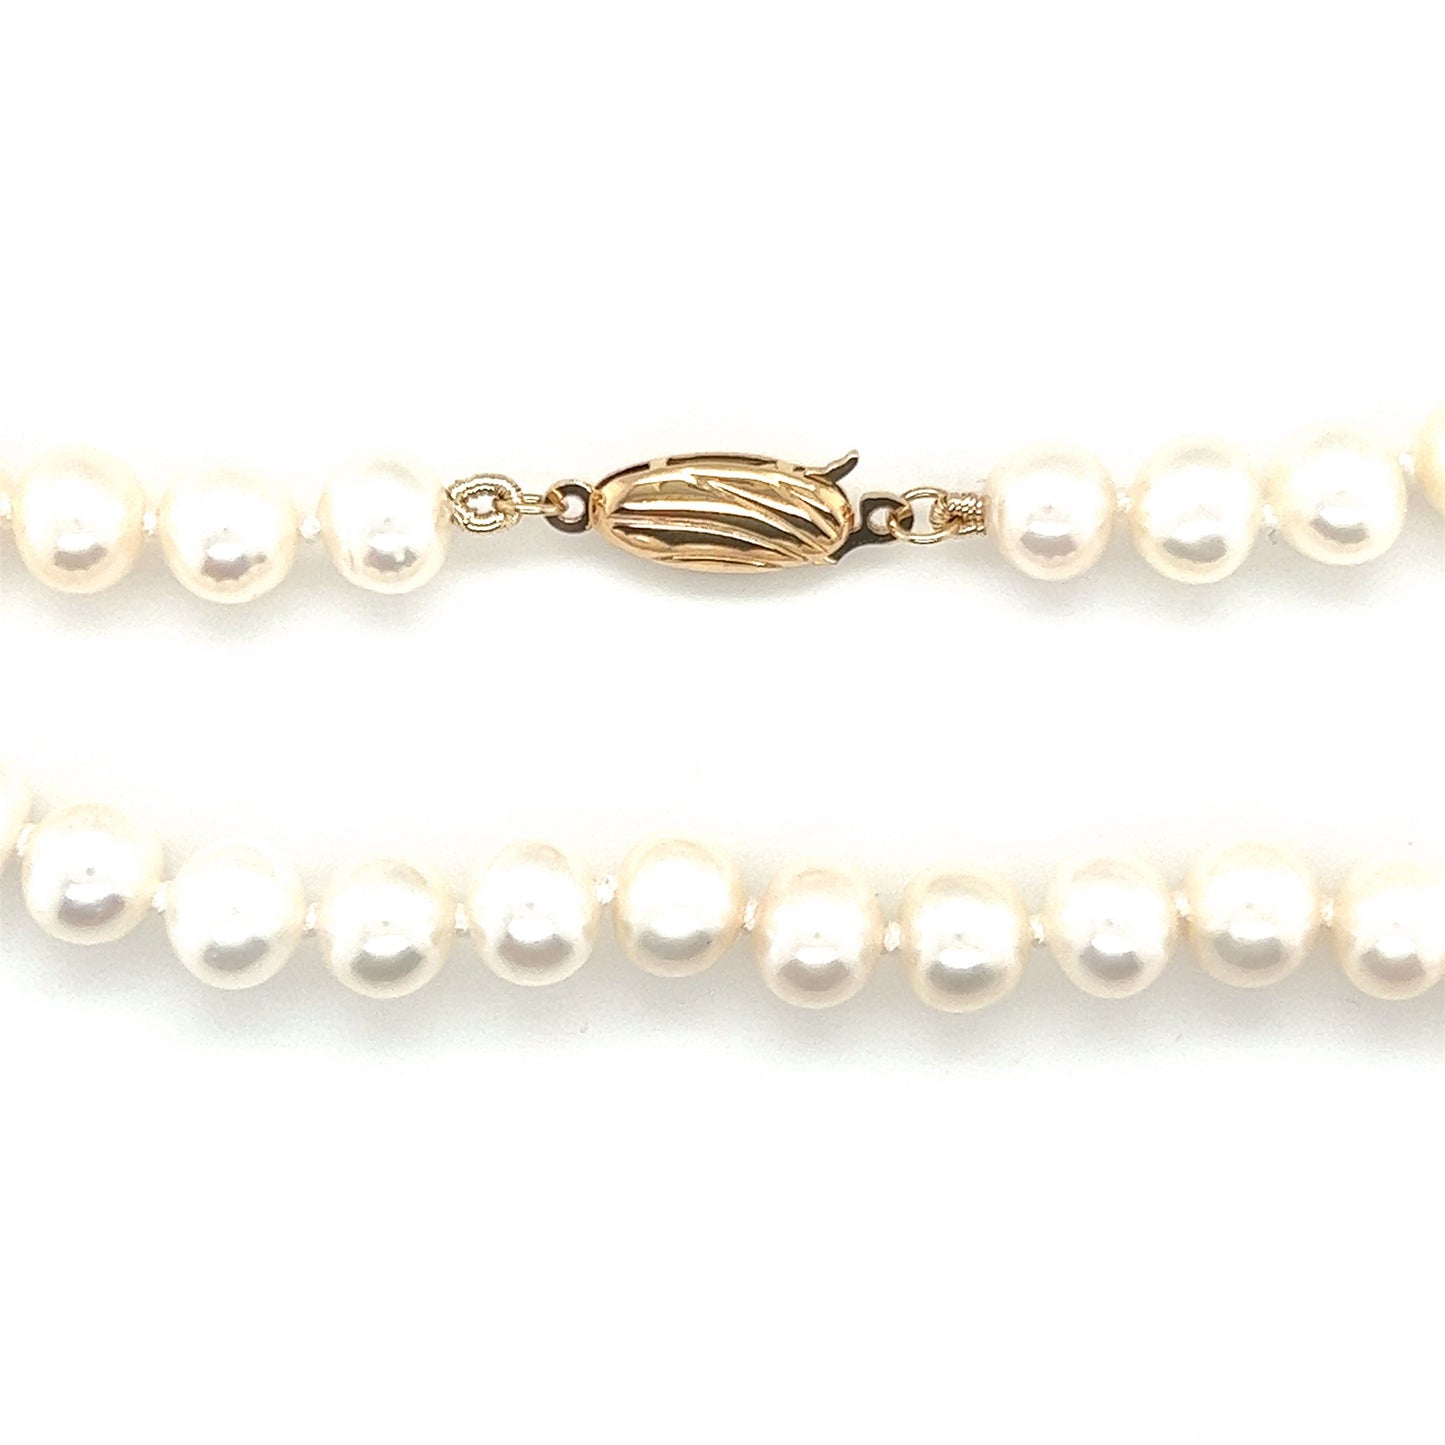 Cultured Freshwater Pearl Necklace with 14K Yellow Gold Clasp Closed Clasp View